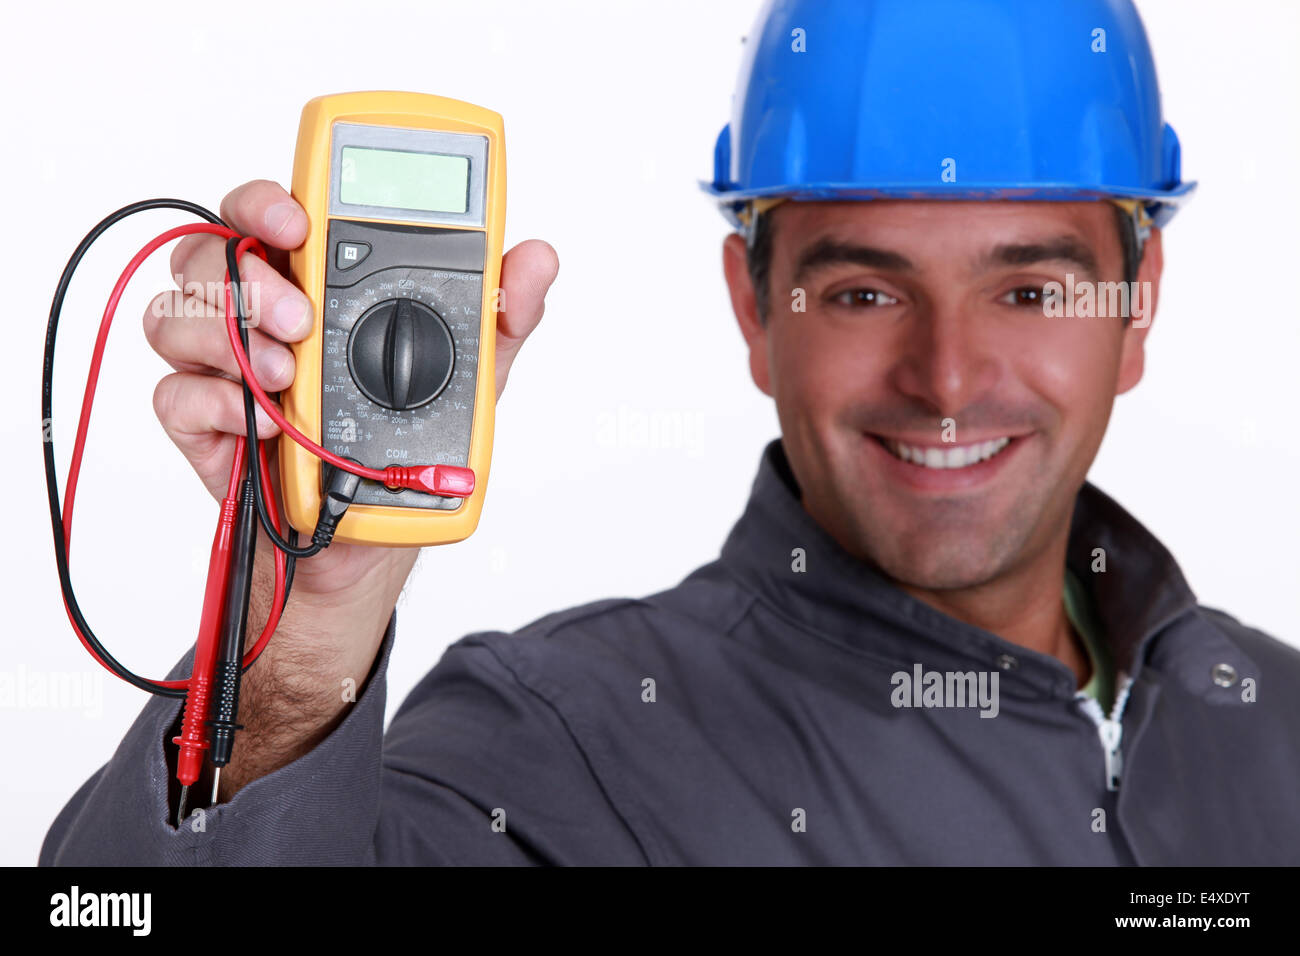 Electrician holding voltmeter Stock Photo